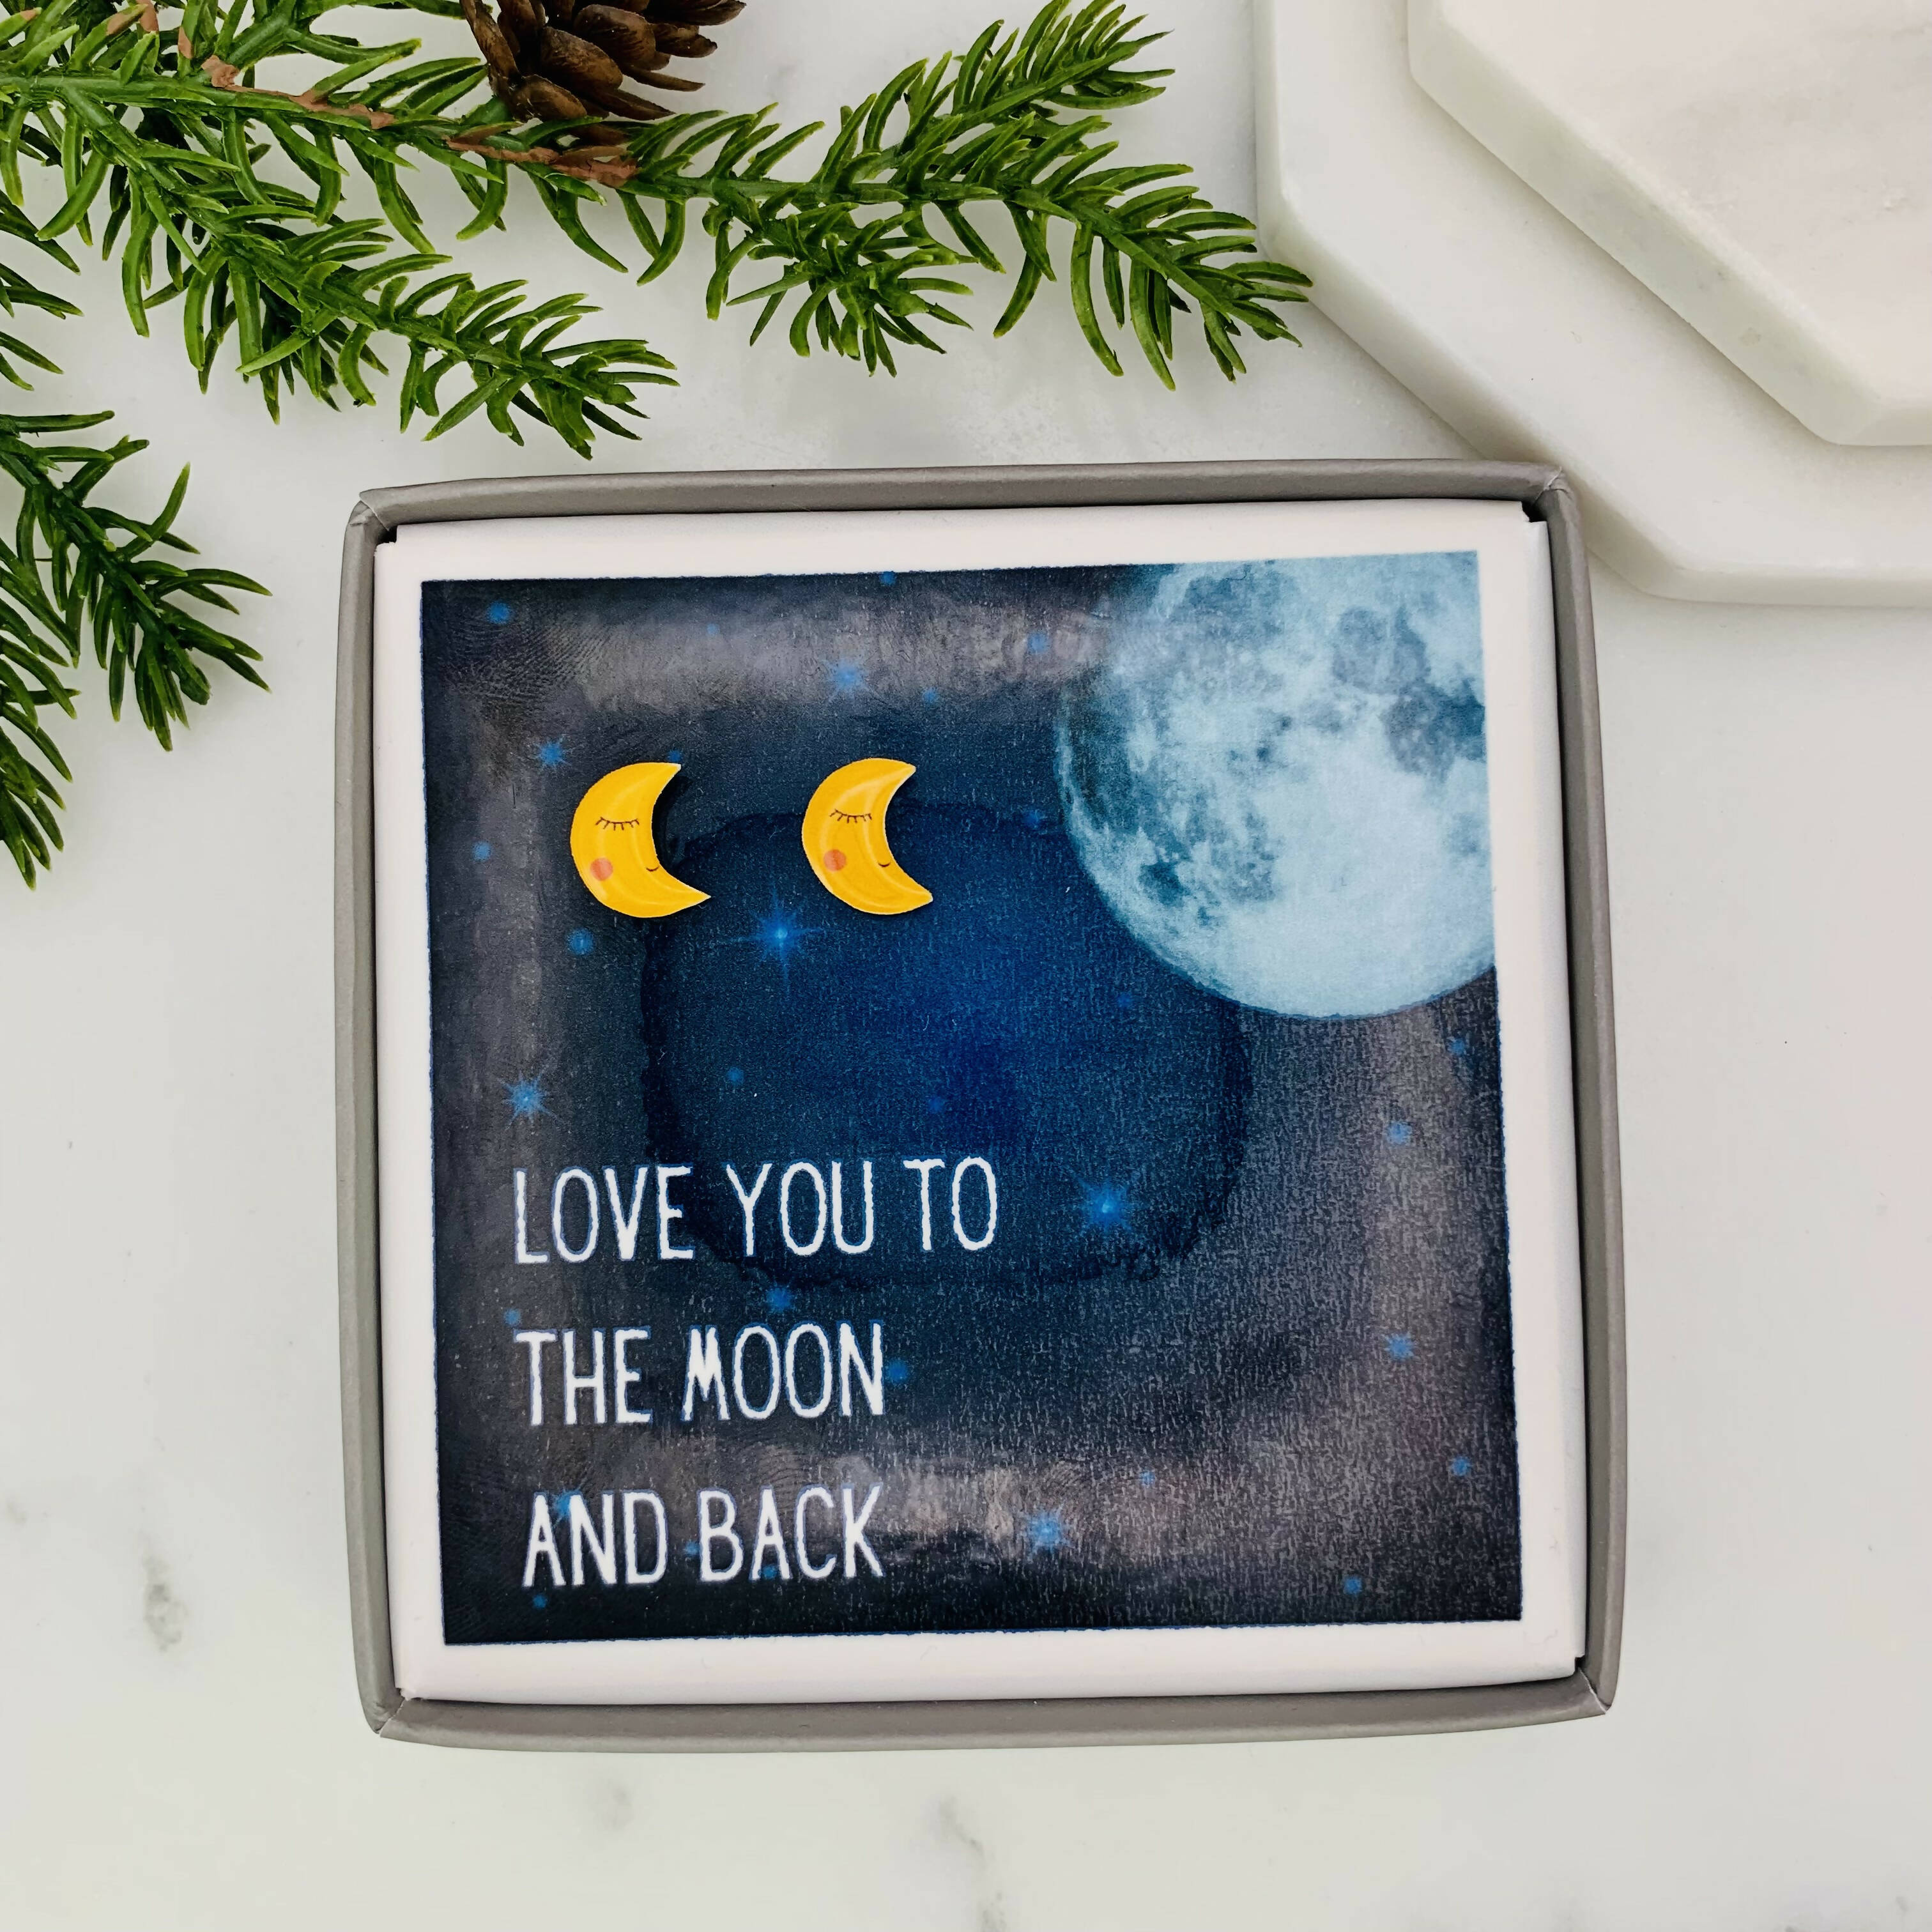 Love you to the moon and back, Jewellery quote card with earrings.